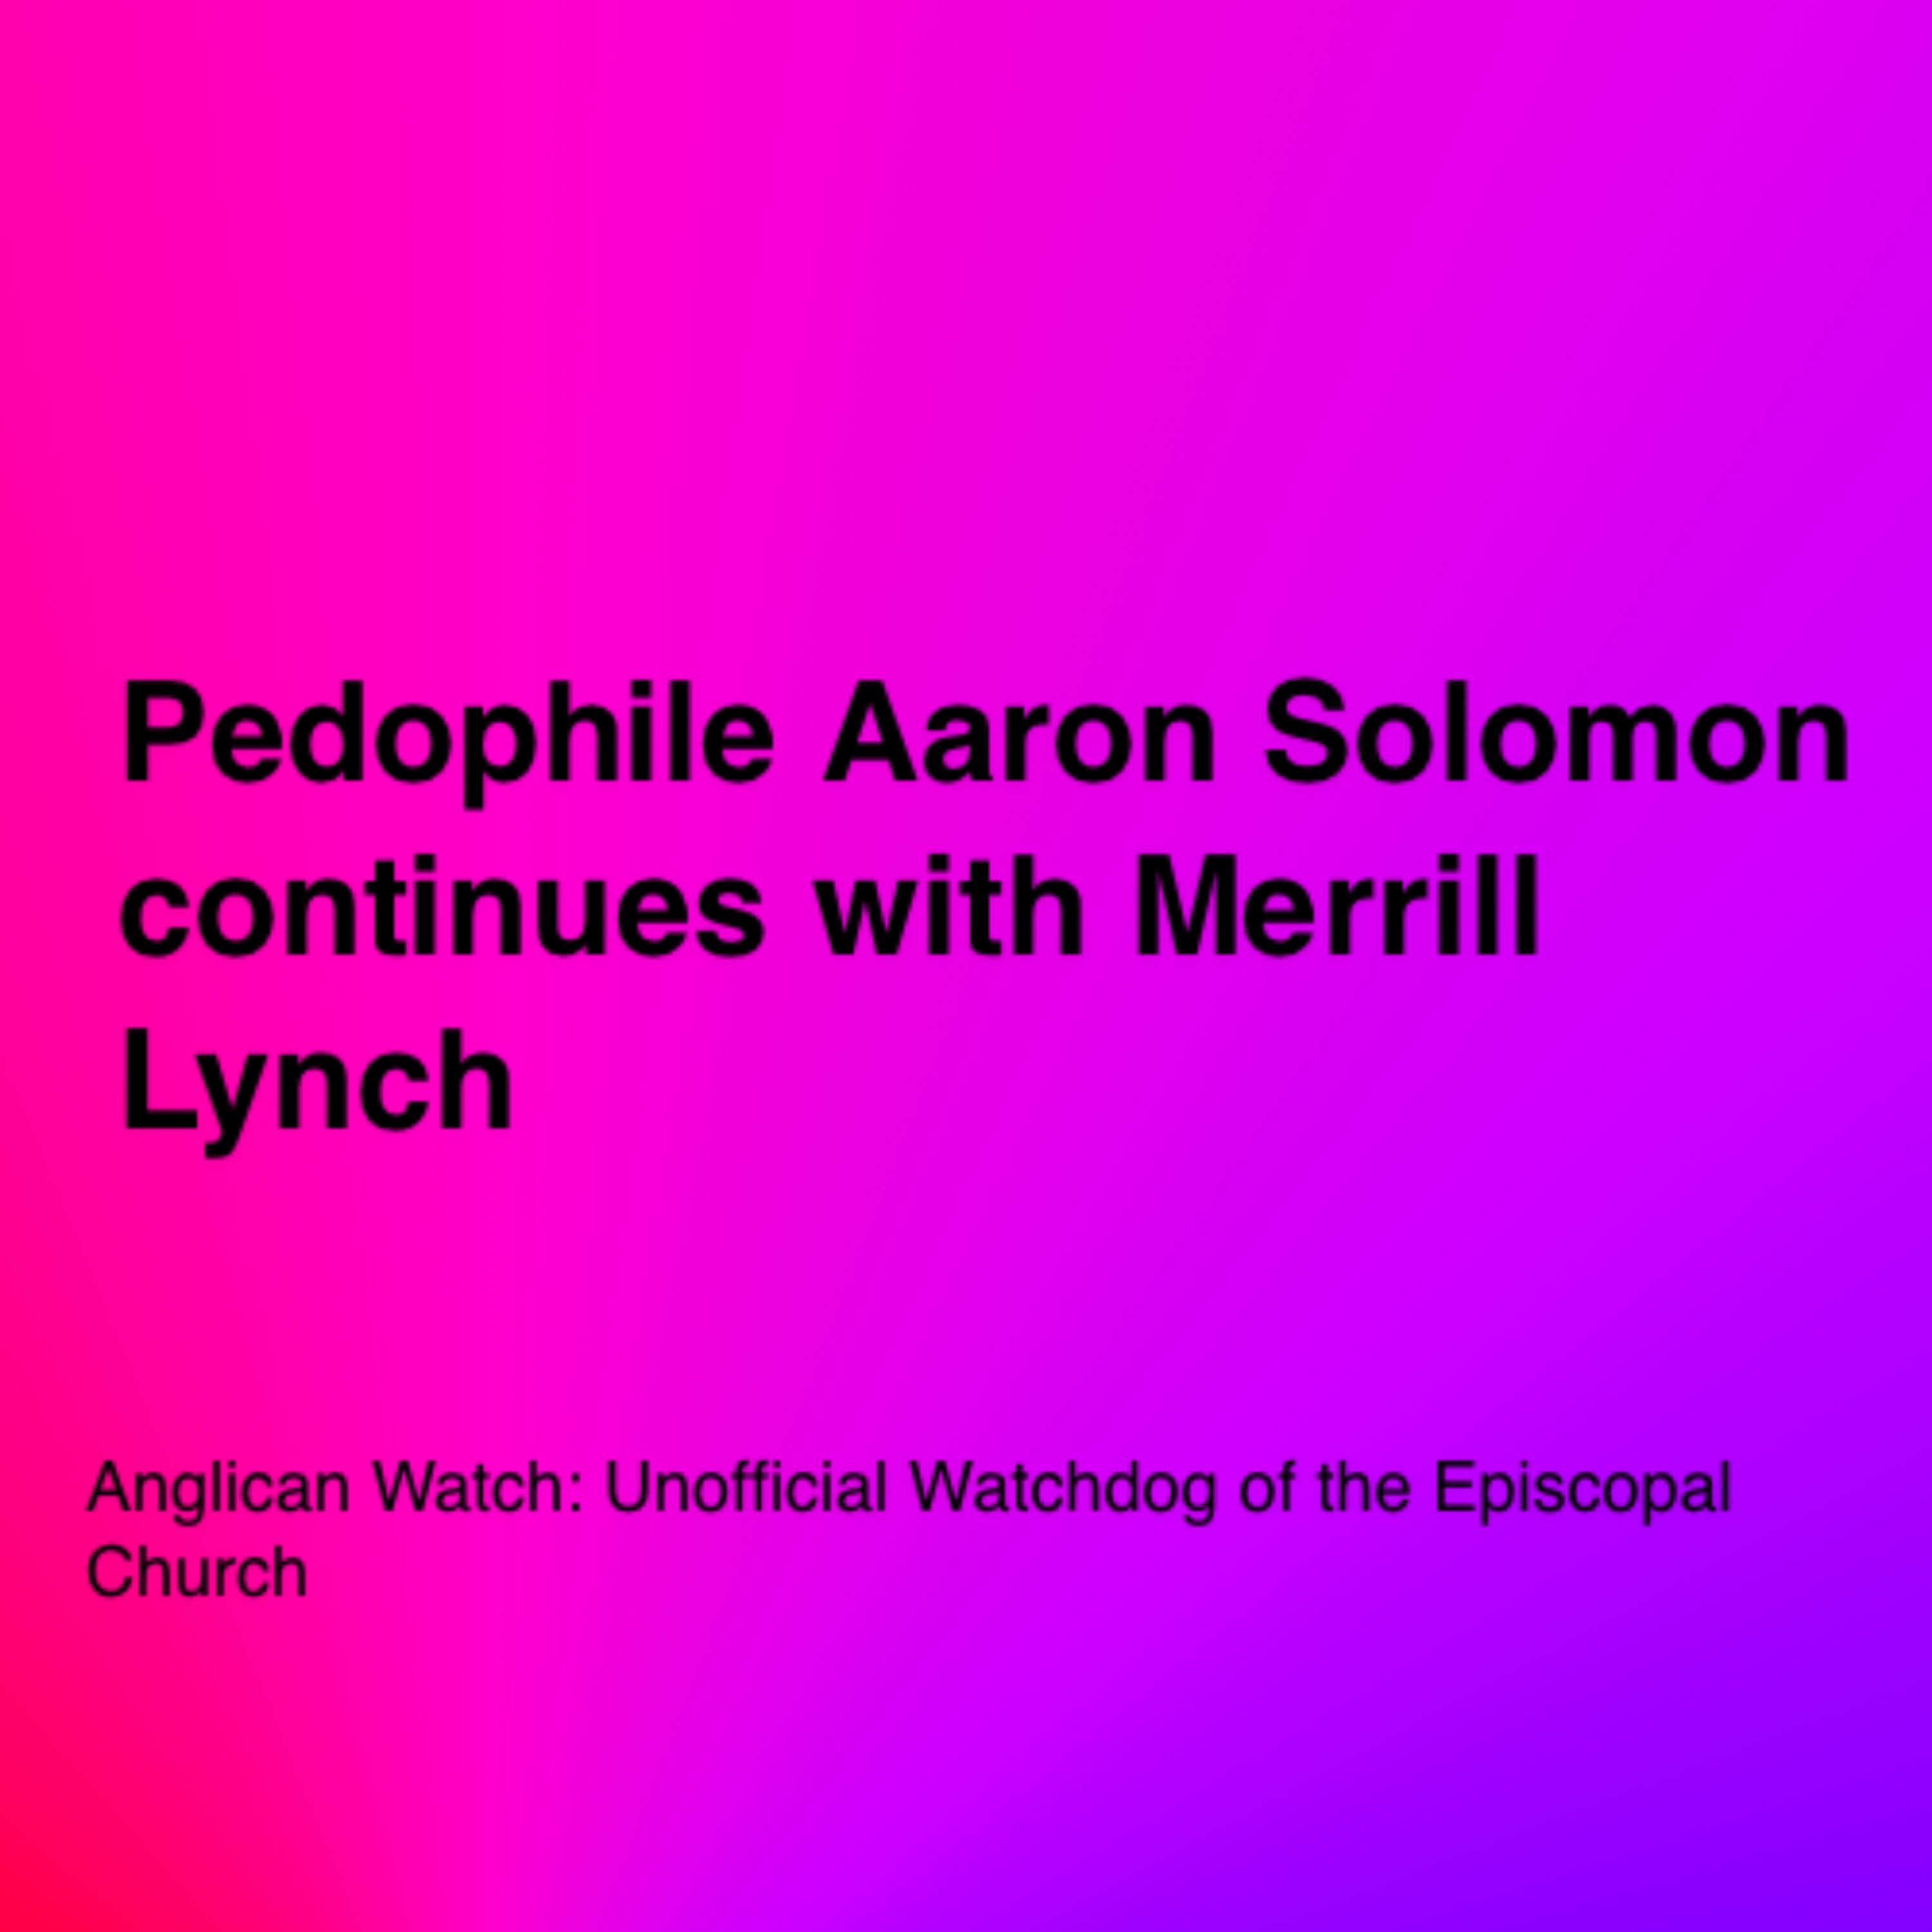 Pedophile Aaron Solomon continues with Merrill Lynch